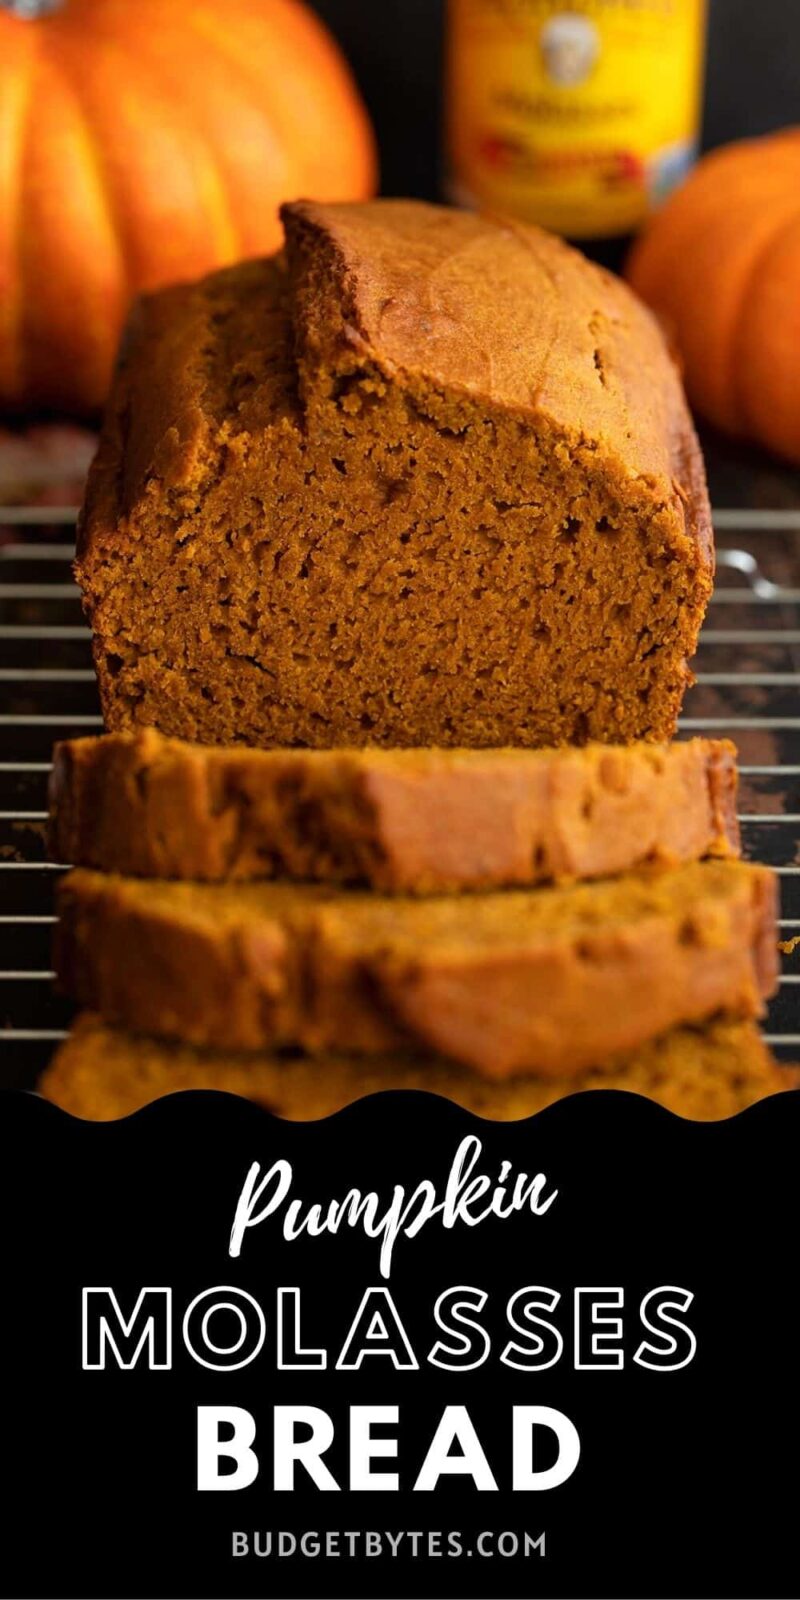 Sliced loaf of pumpkin molasses bread viewed from the front, title text at the bottom